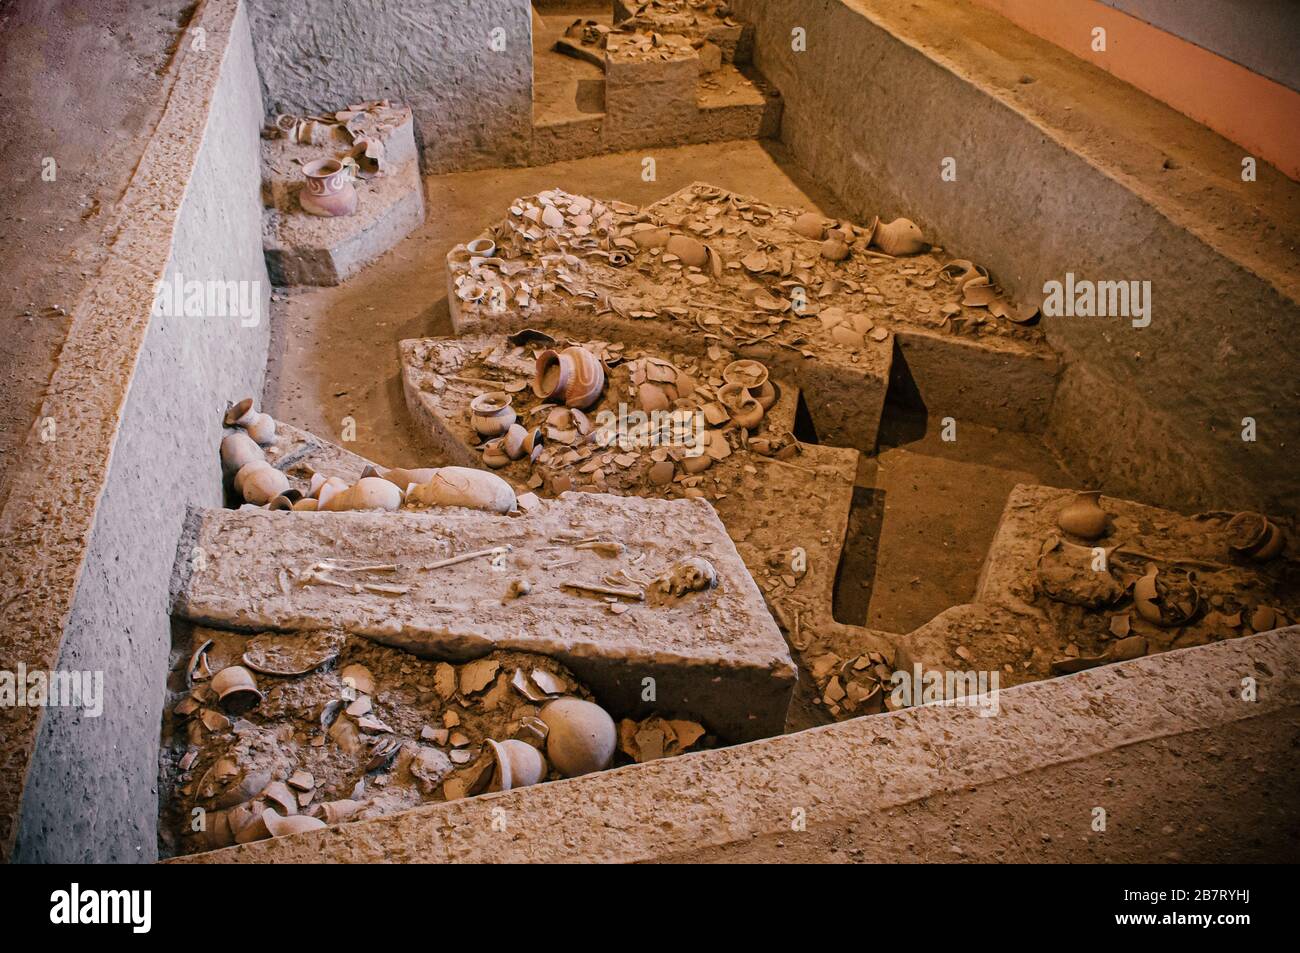 JAN 12, 2019 Udon Thani, Thailand - Ancient pottery containers and prehistory human bones in Excavation site of Ban Chiang Museum Stock Photo